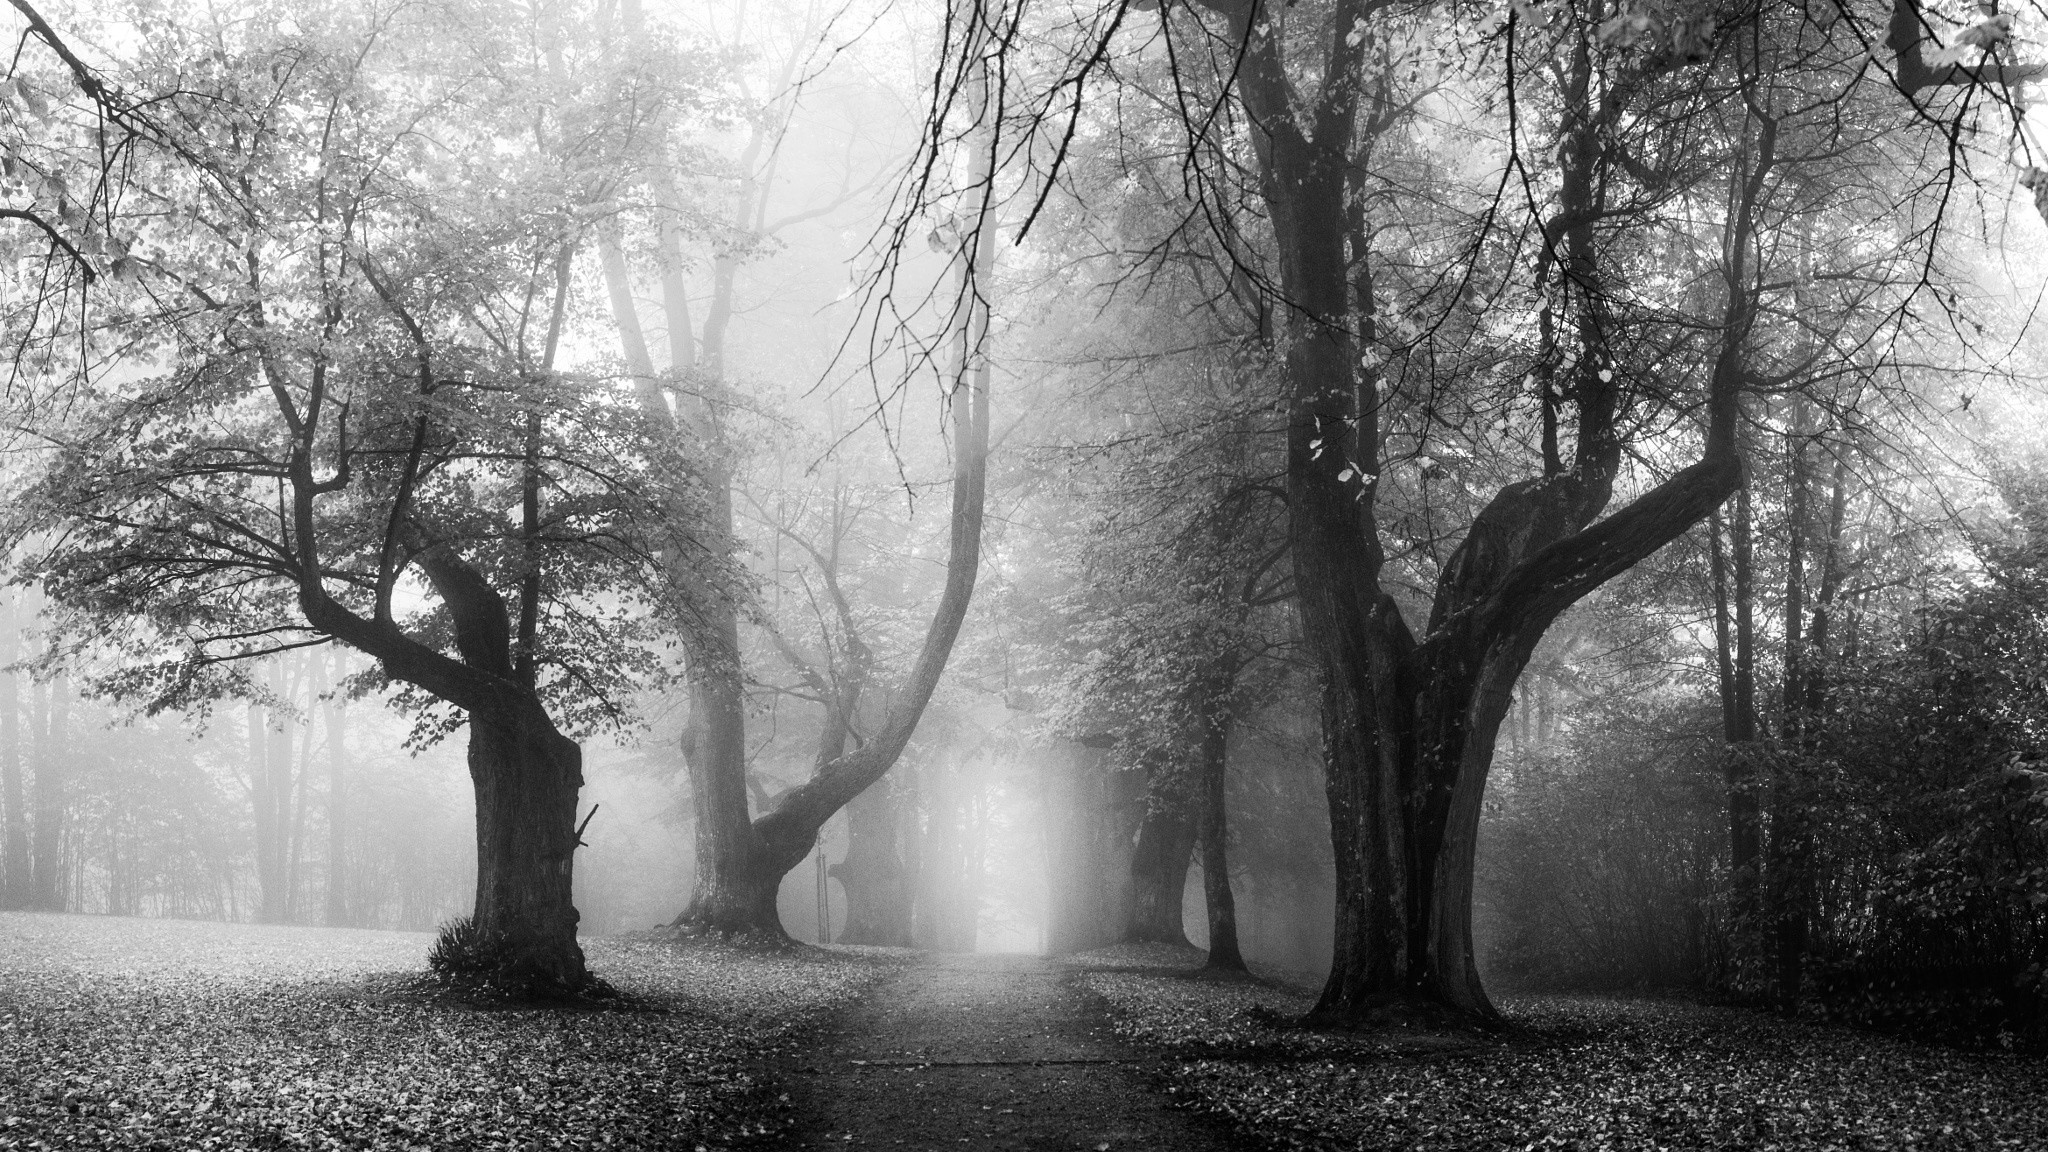 landscape, Nature, Sunrise, Morning, Mist, Fall, Leaves, Old, Trees, Path, Dirt Road, Monochrome, Germany Wallpaper